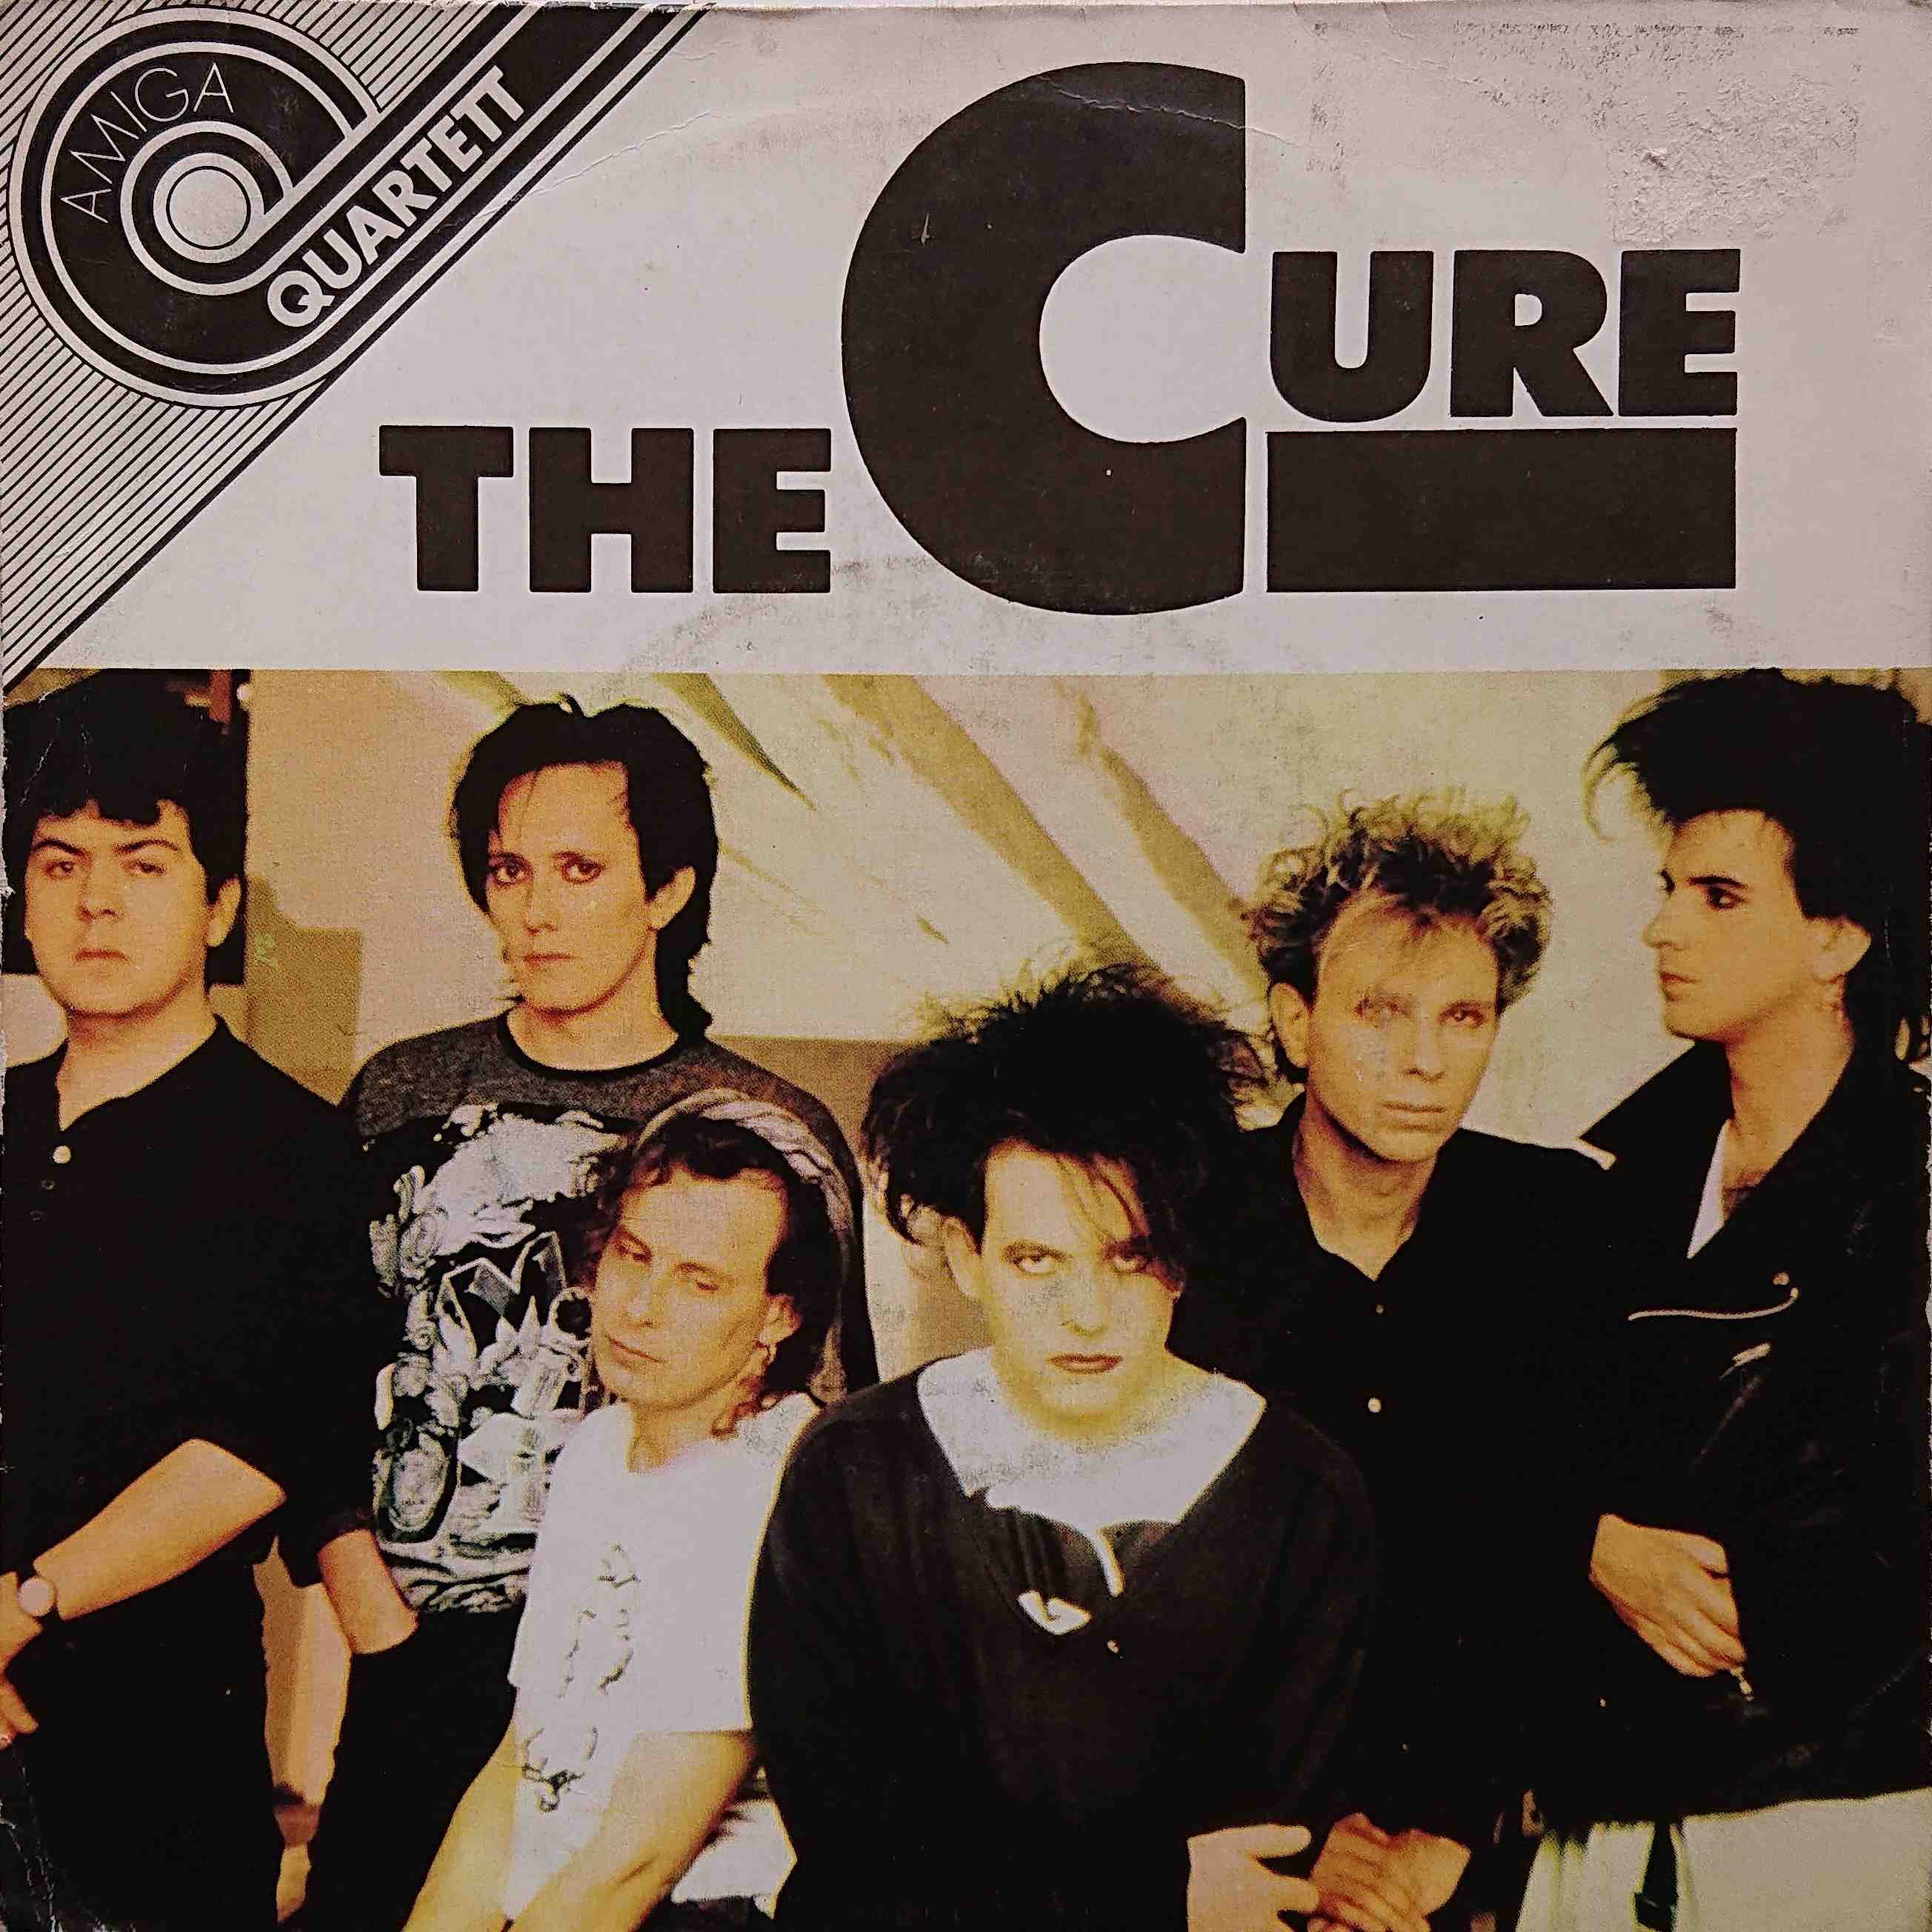 Picture of Close to me by artist The Cure  